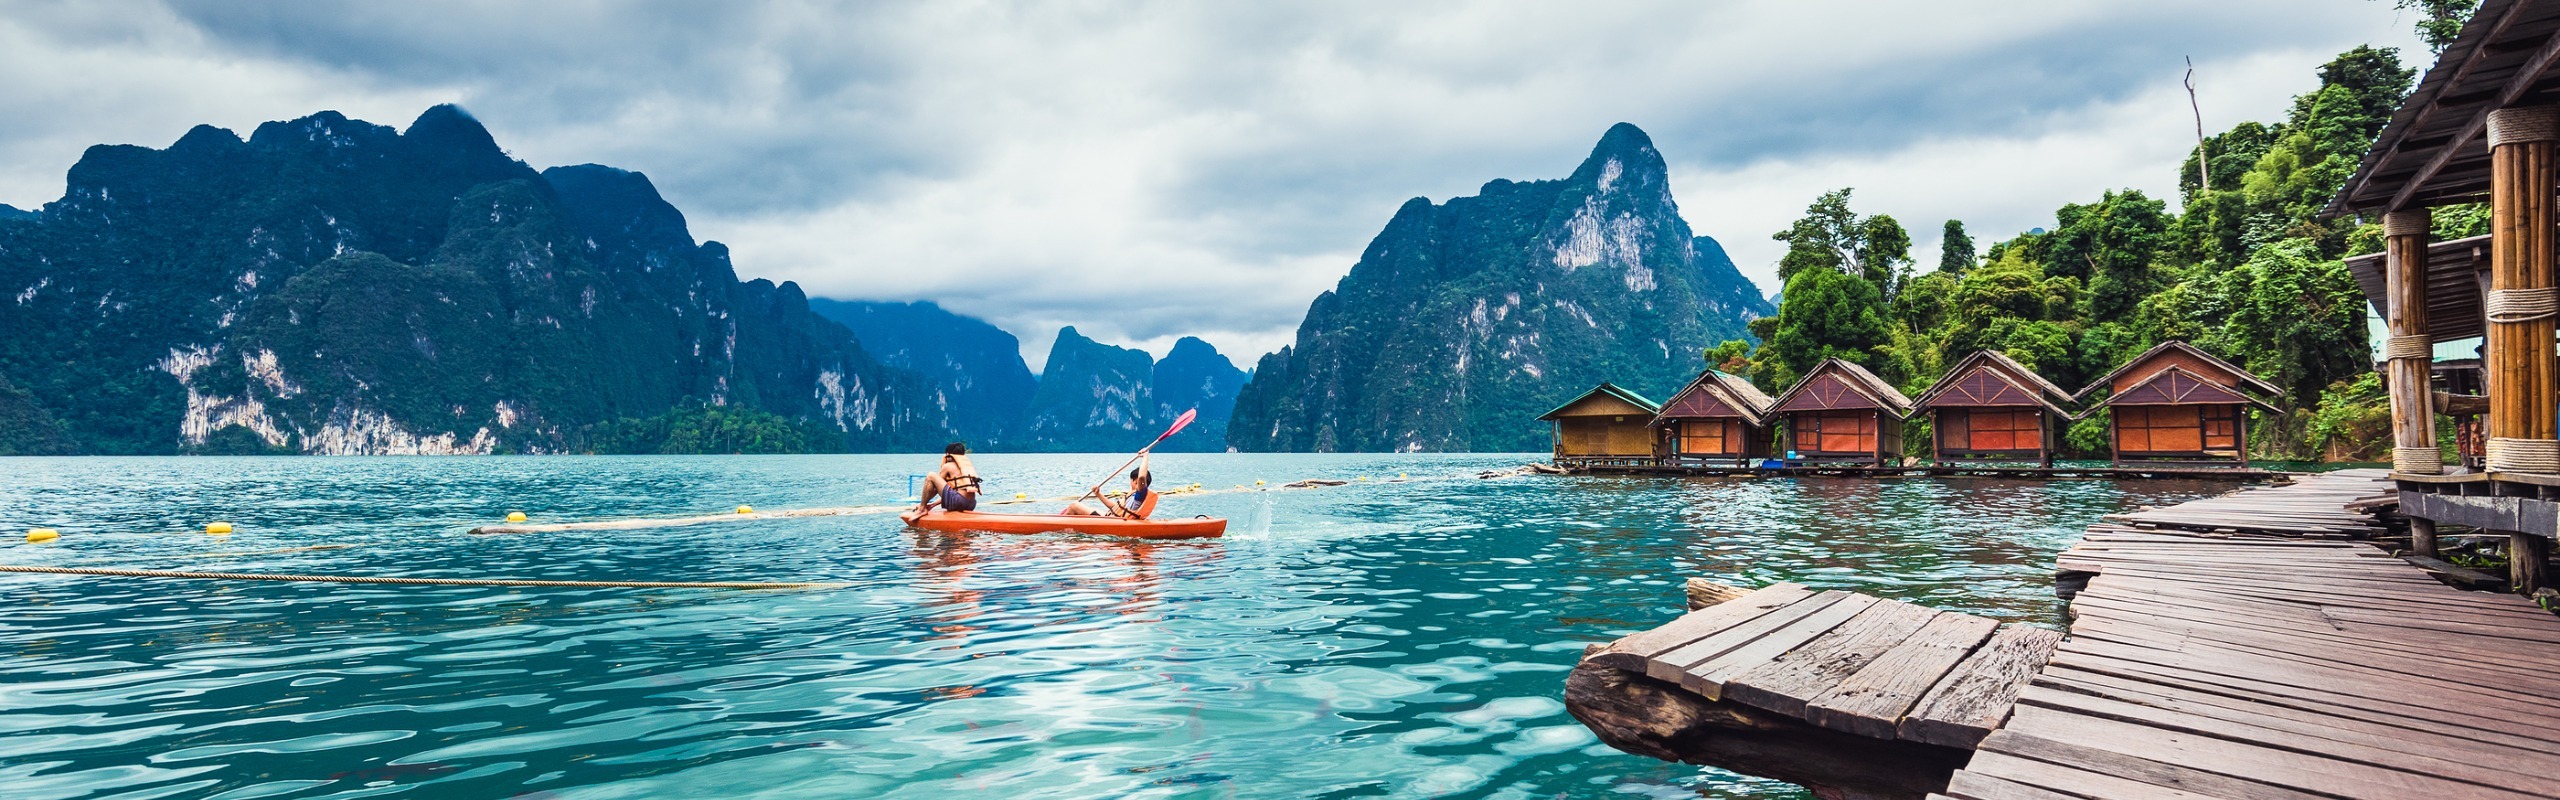 Thailand Honeymoons: 8 Best Romantic Places, Itineraries